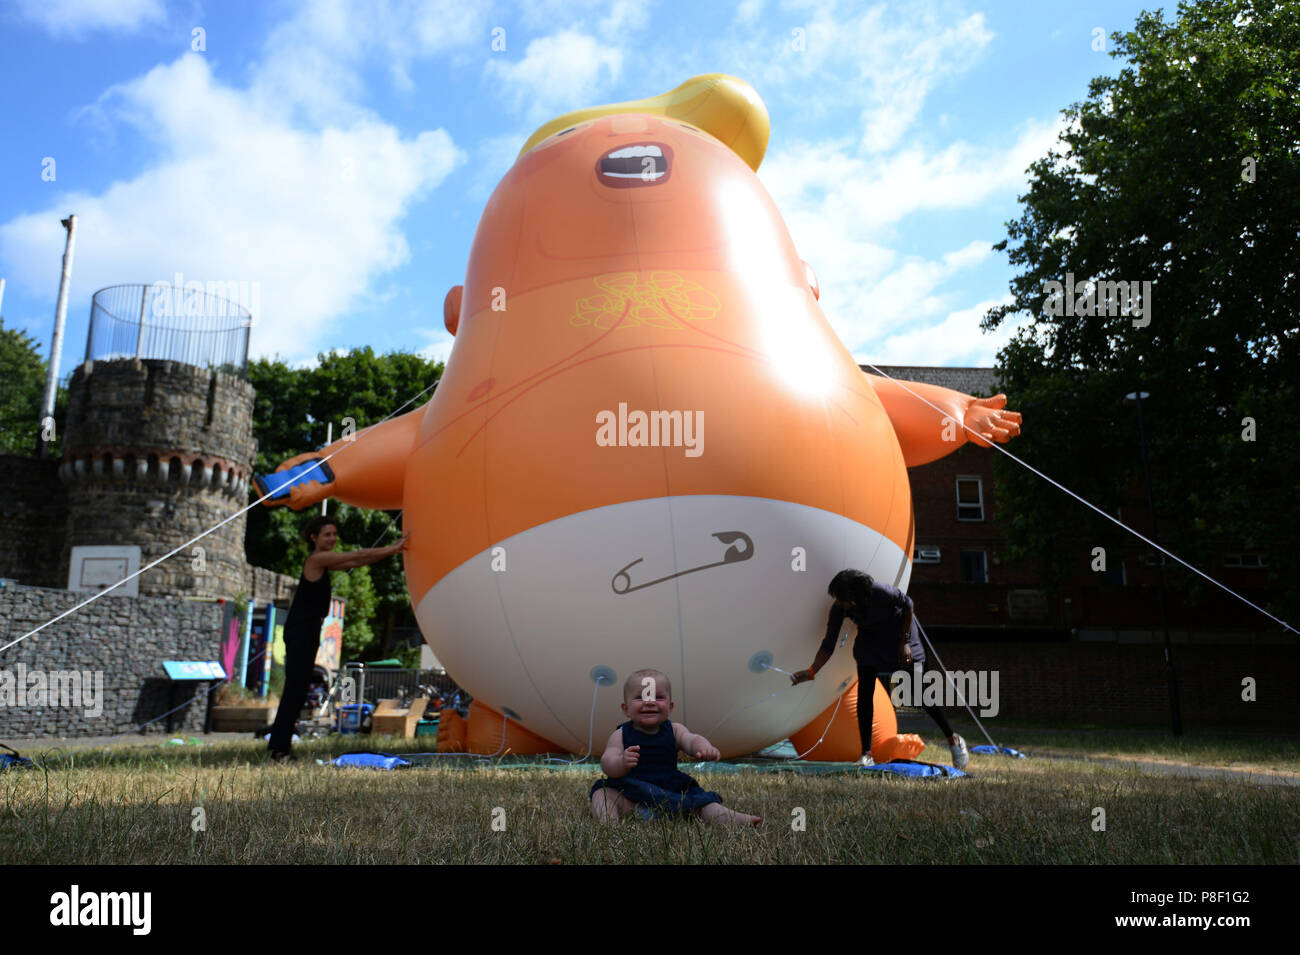 Nine-month-old Ivy Eakin sits in front of the Trump Baby Blimp as is inflated for a practice test, at Bingfield Park in north London. Stock Photo